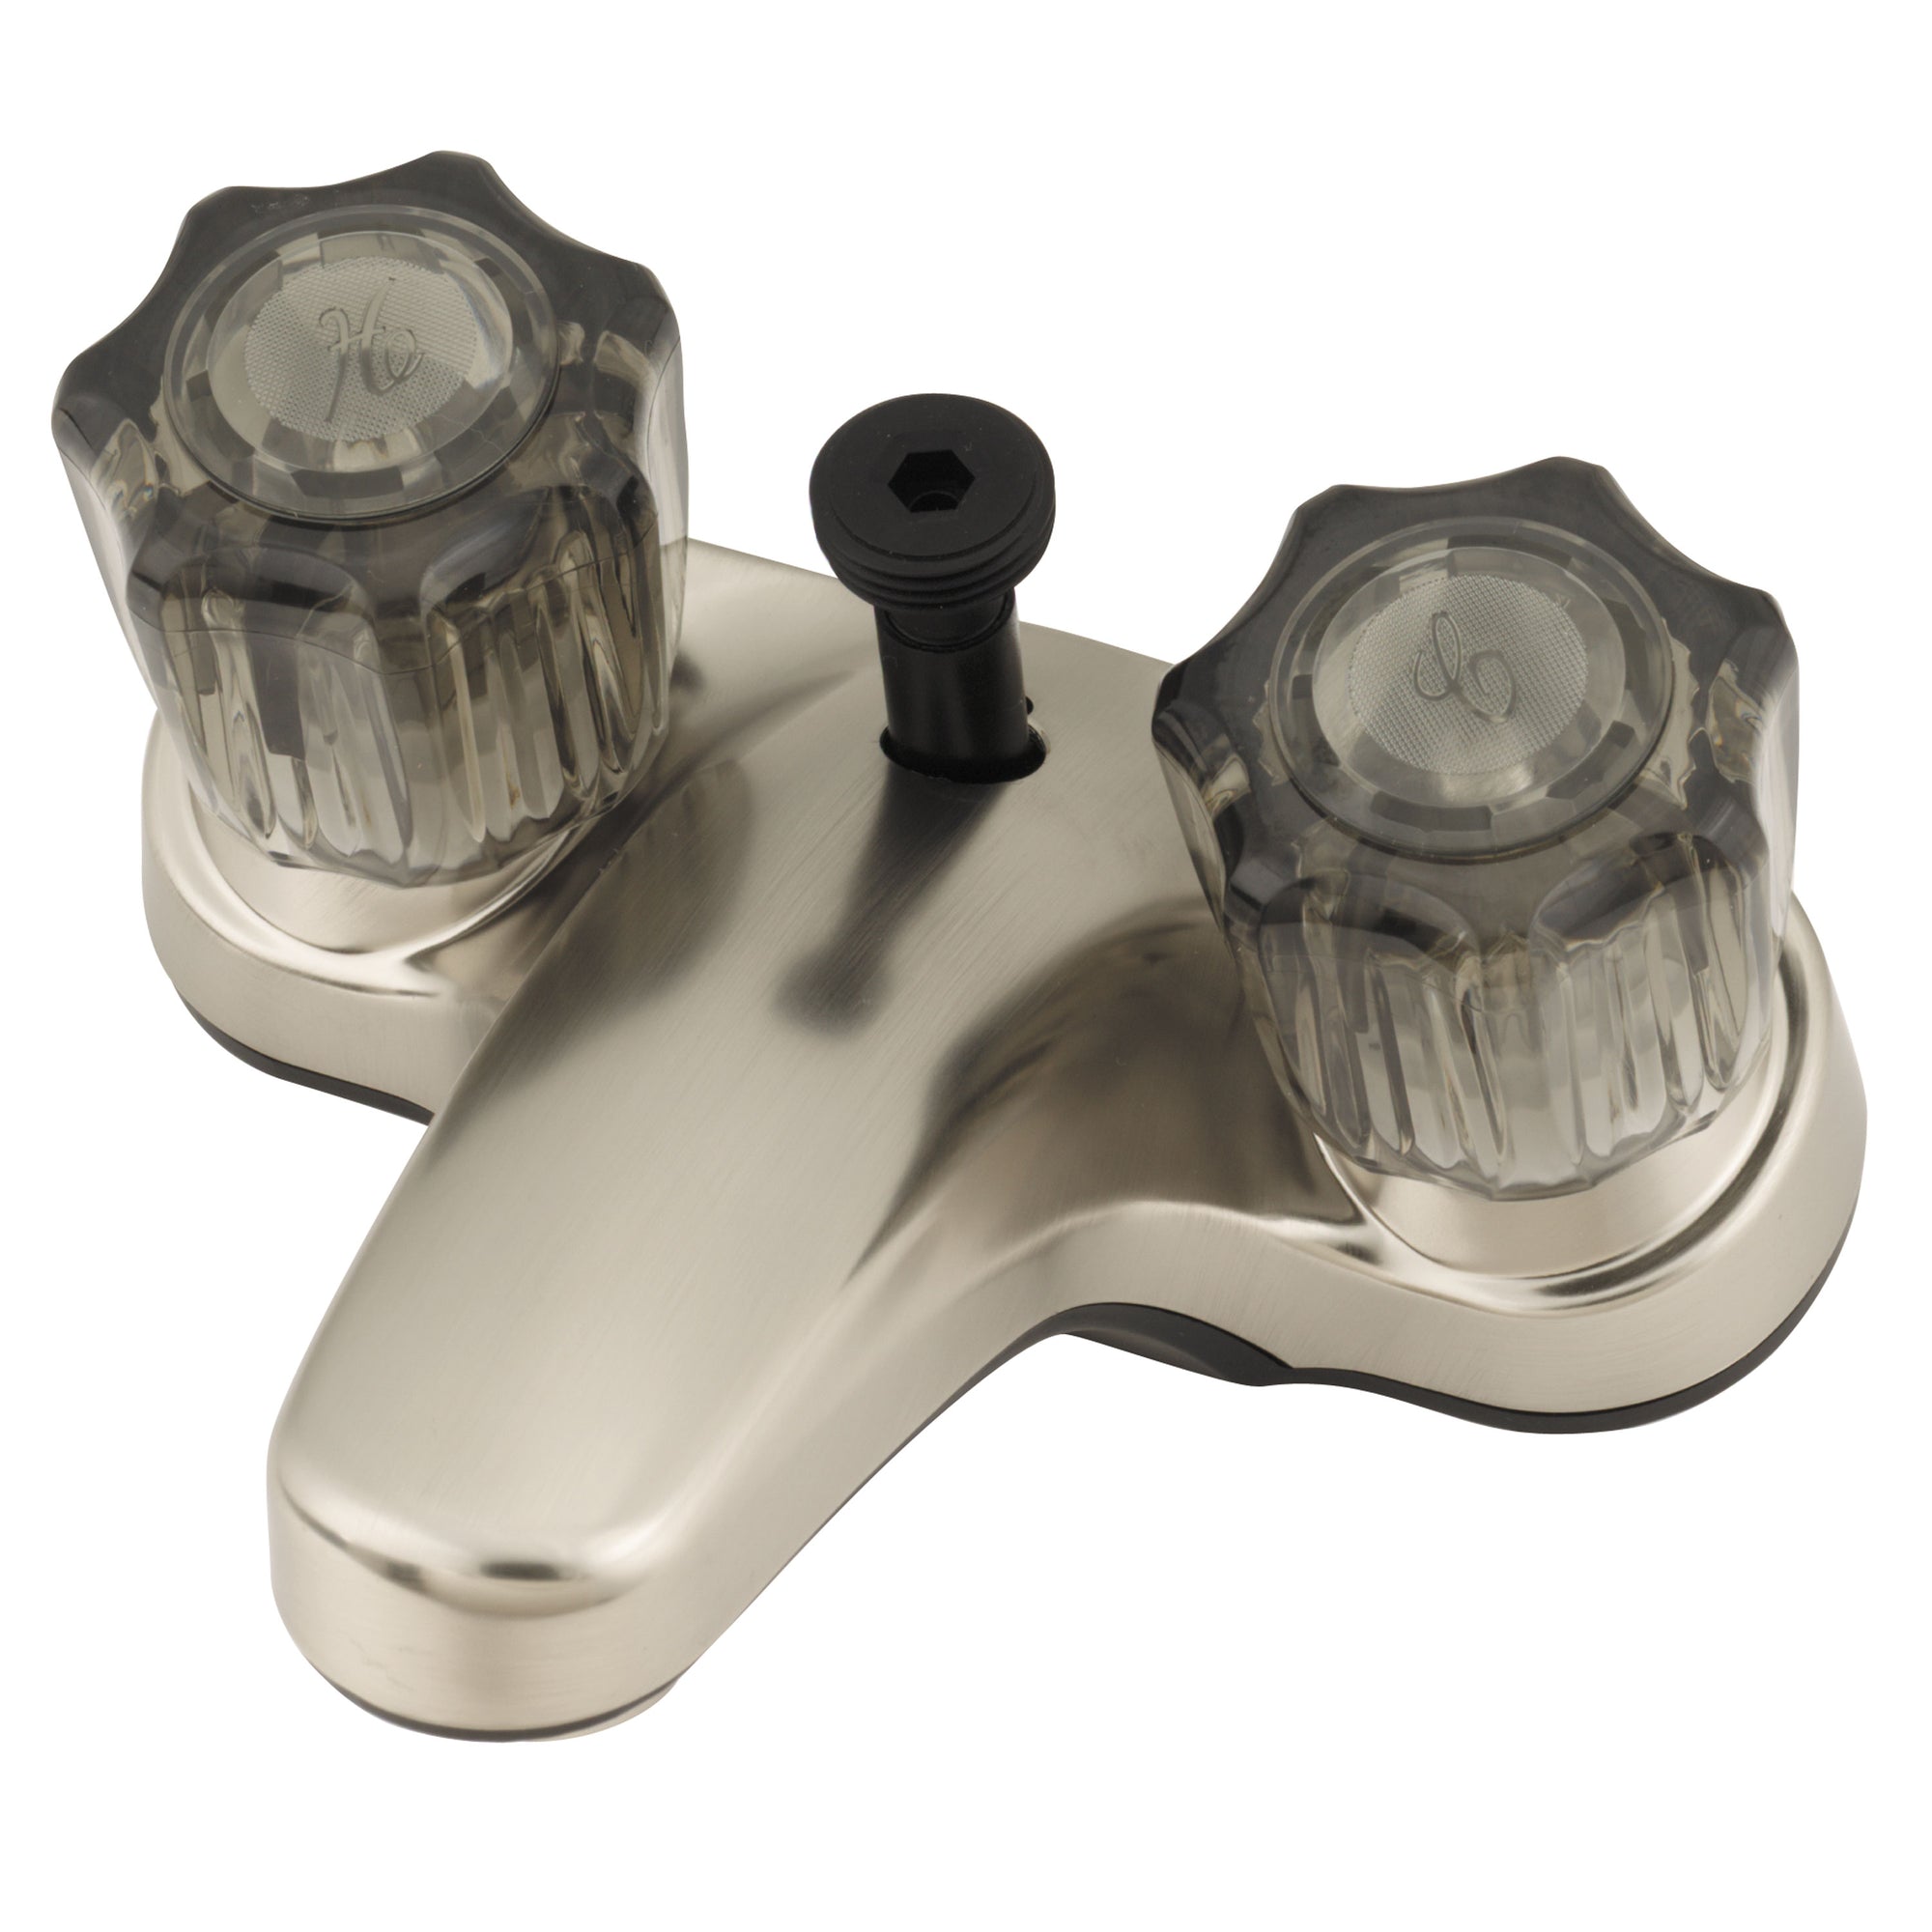 Empire Brass U-YCJW73N RV Non-Metallic Bathroom Diverter with Smoked Crystal Handles - 4", Brushed Nickel